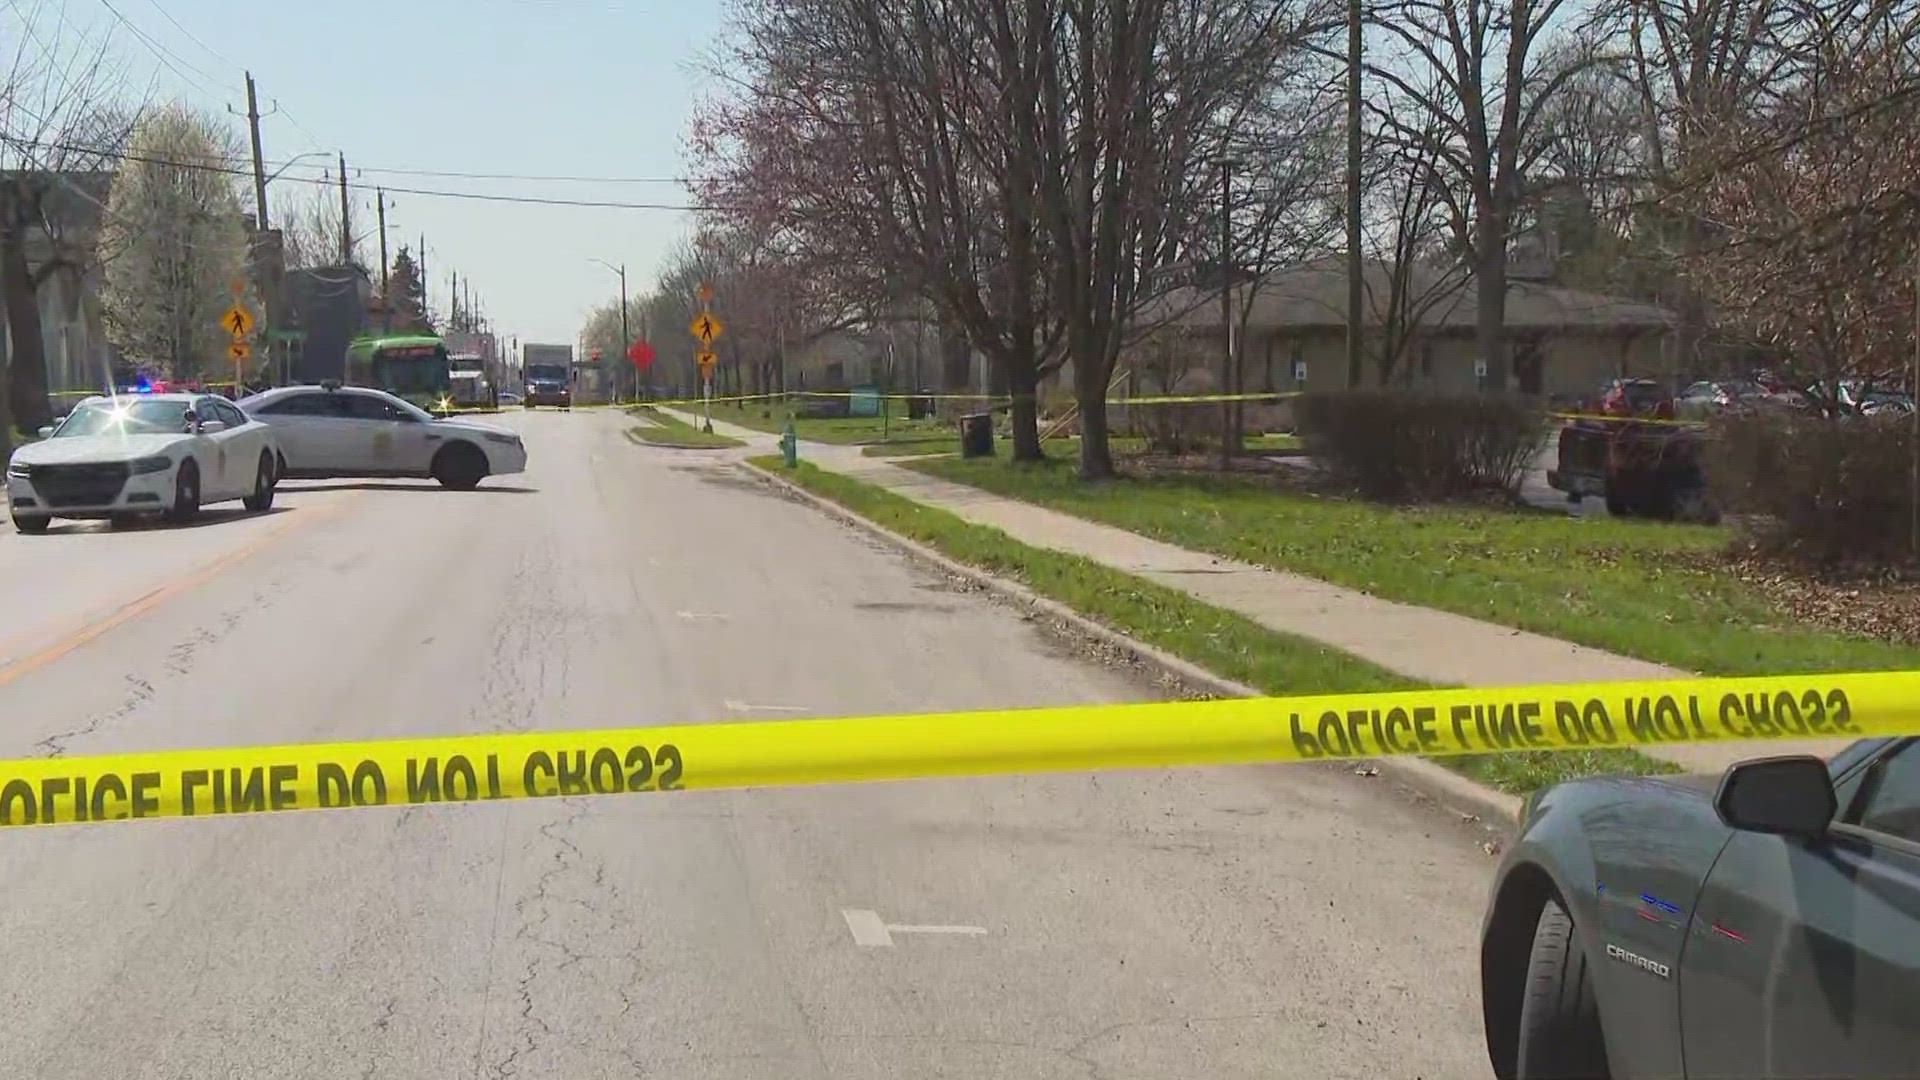 The incident happened shortly before noon Friday in the 2500 block of Shelby Street on Indy's south side.